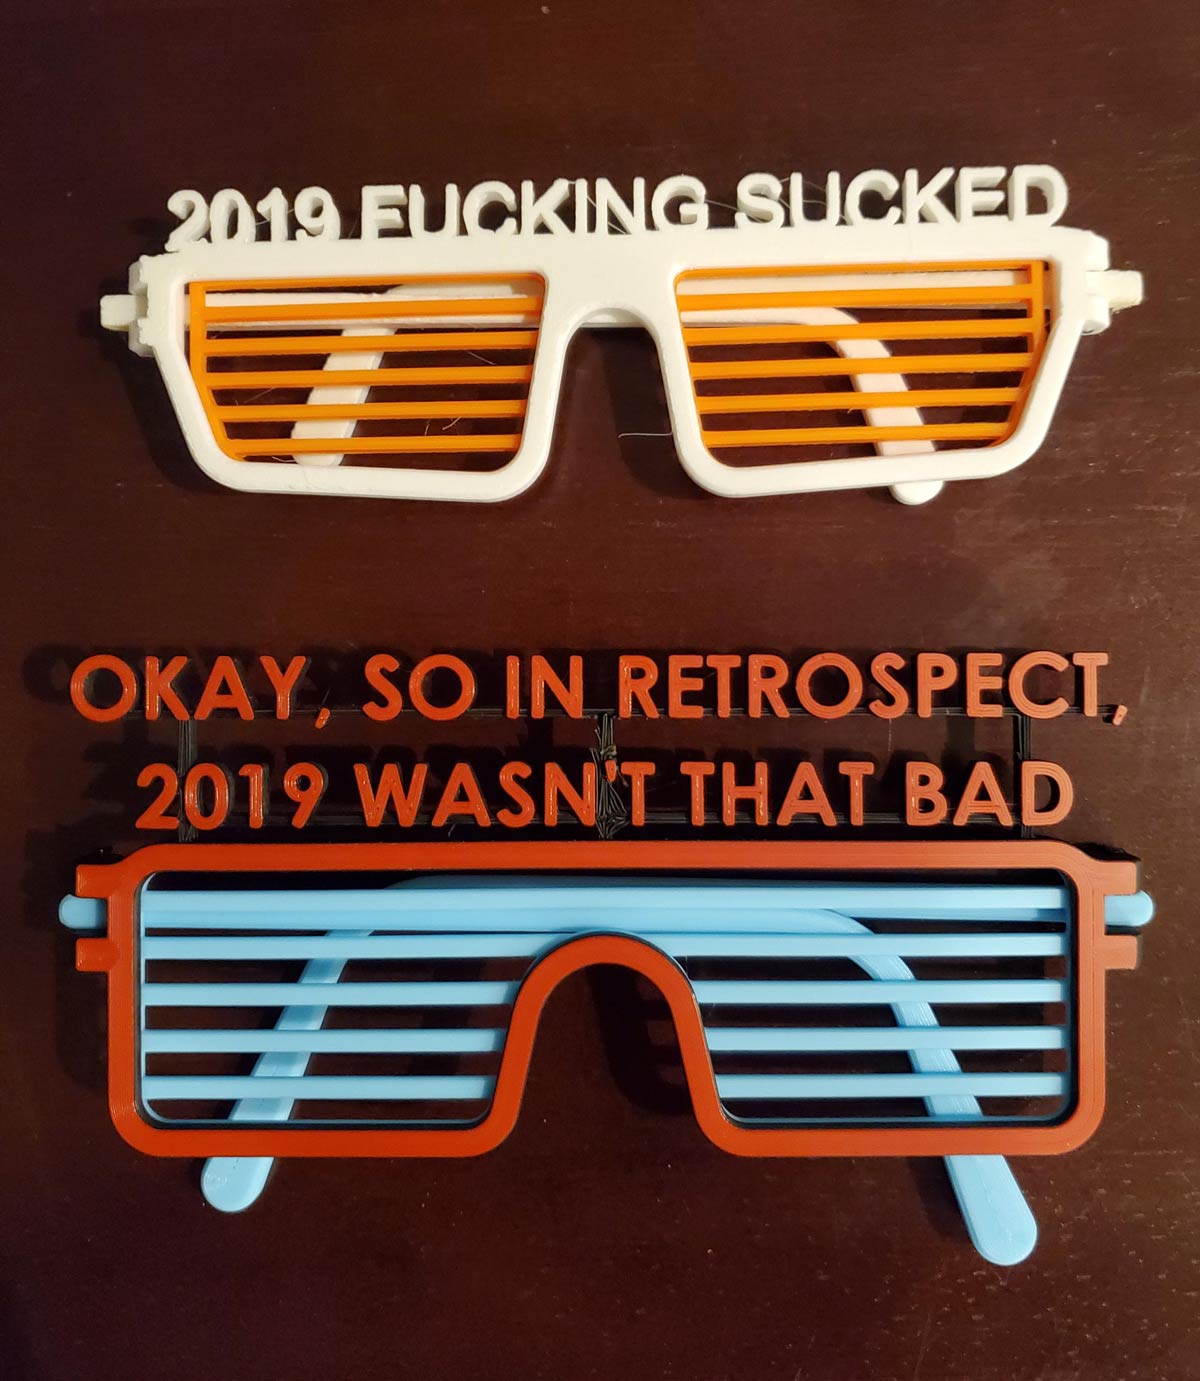 Behold! My friend makes glasses each year for his New Year's get together. 2019 edition vs 2020 edition